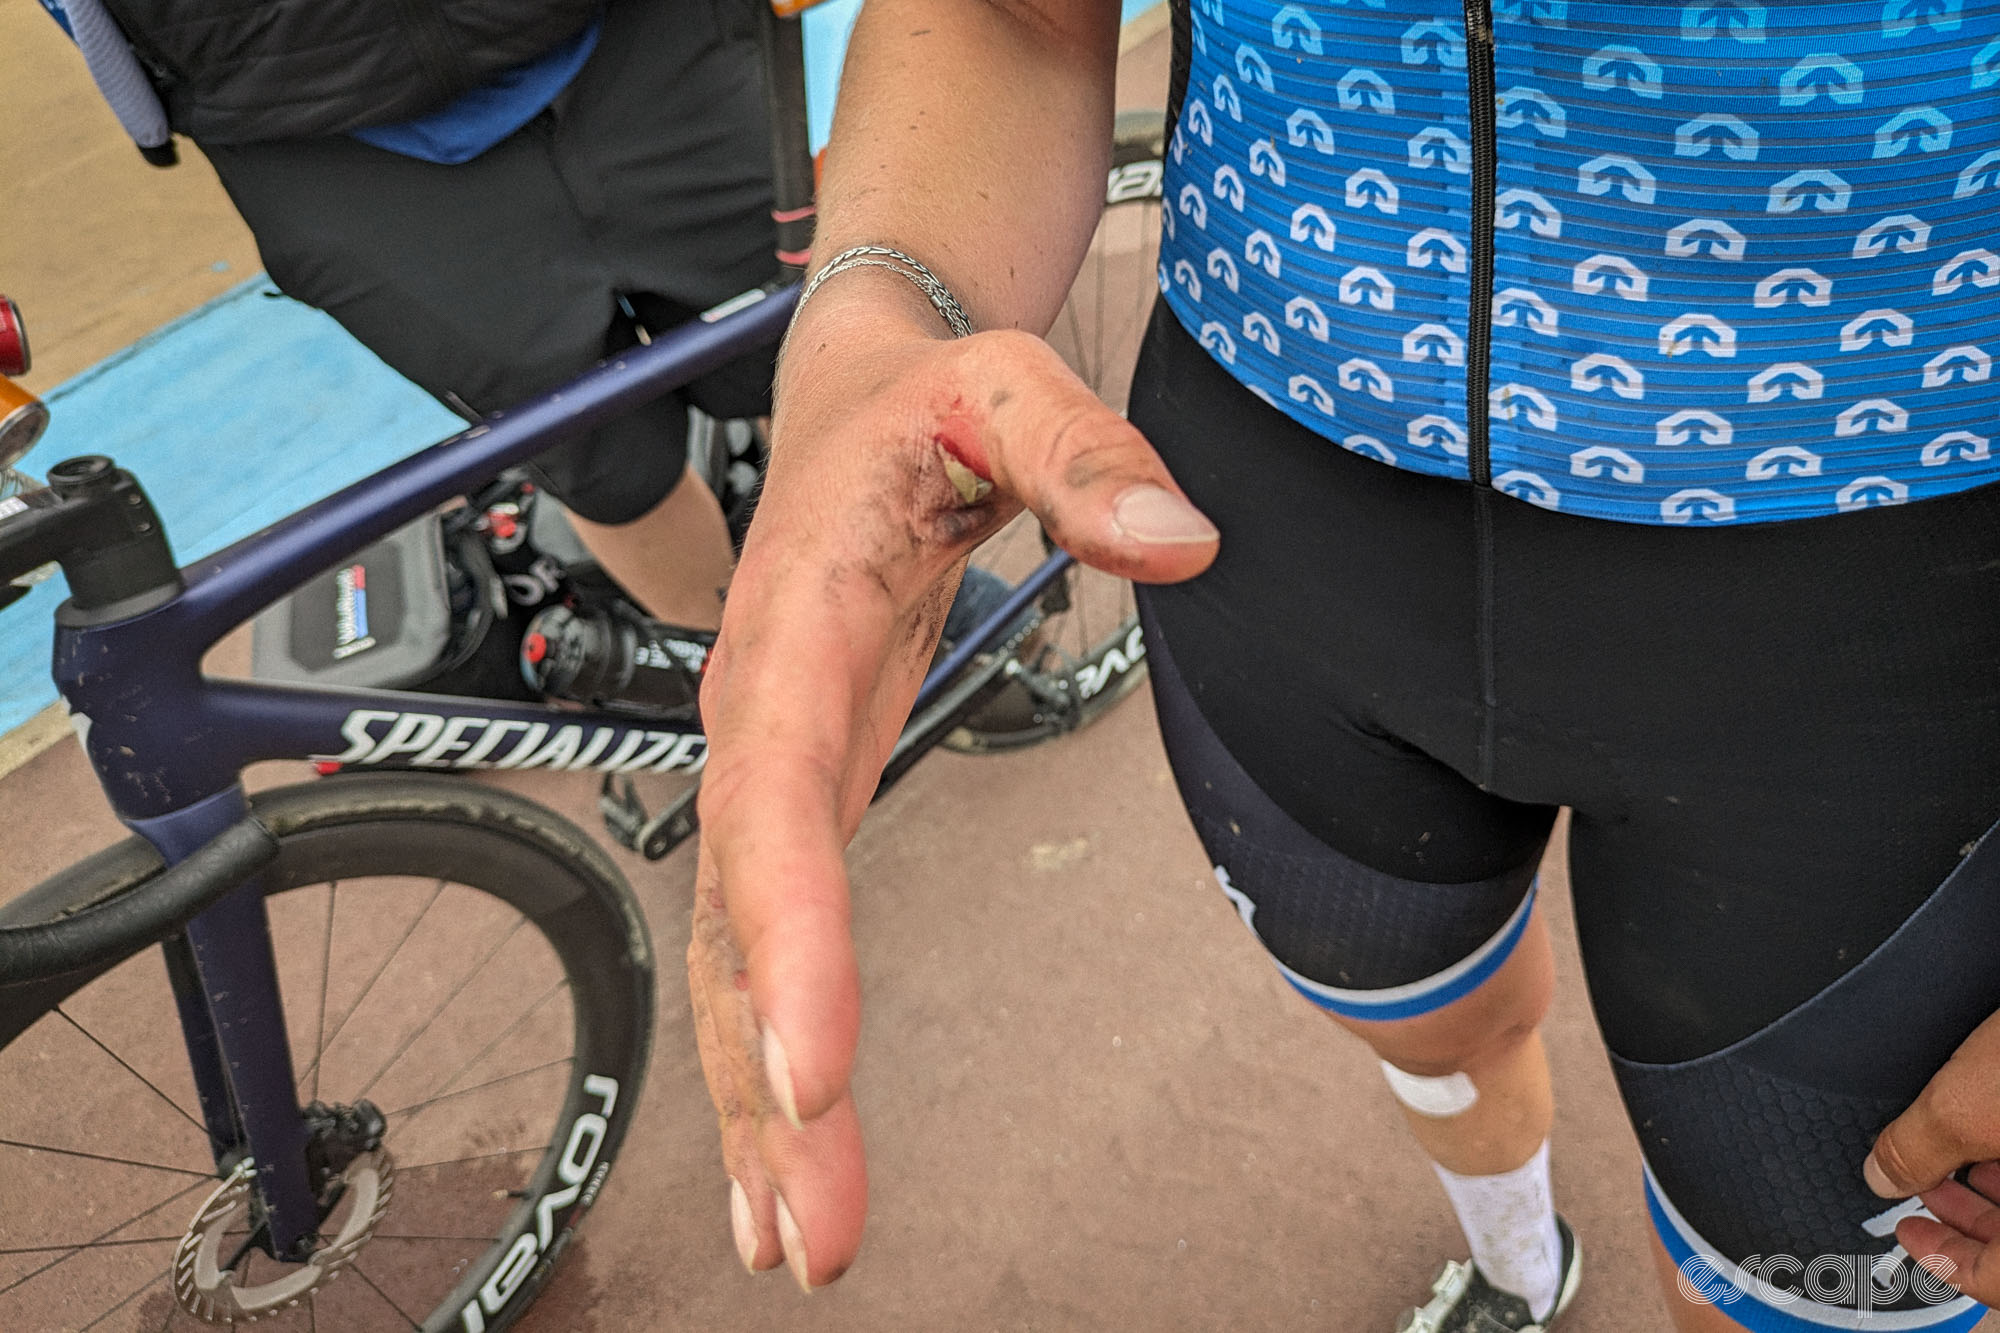 Femke Beuling's right hand has a nasty, cracked blister between thumb and forefinger. It's red and angry and there's a lot of dirt in it and we hope she cleans it out thoroughly.